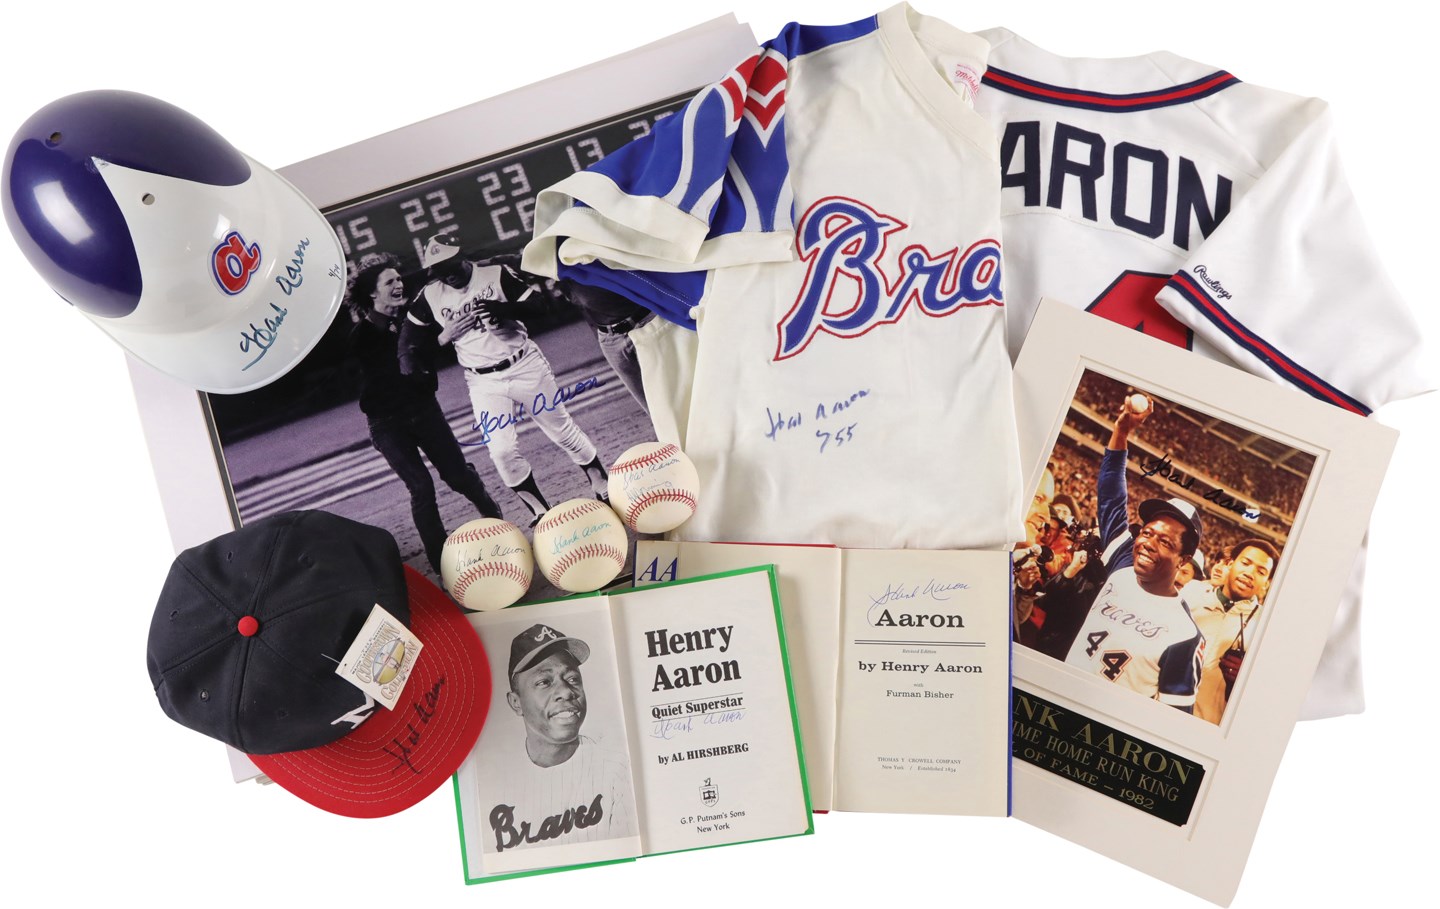 - Enormous Hank Aaron Autograph Collection Including Jerseys, Helmet, Balls, Contract, and Photos (16) (w/PSA)